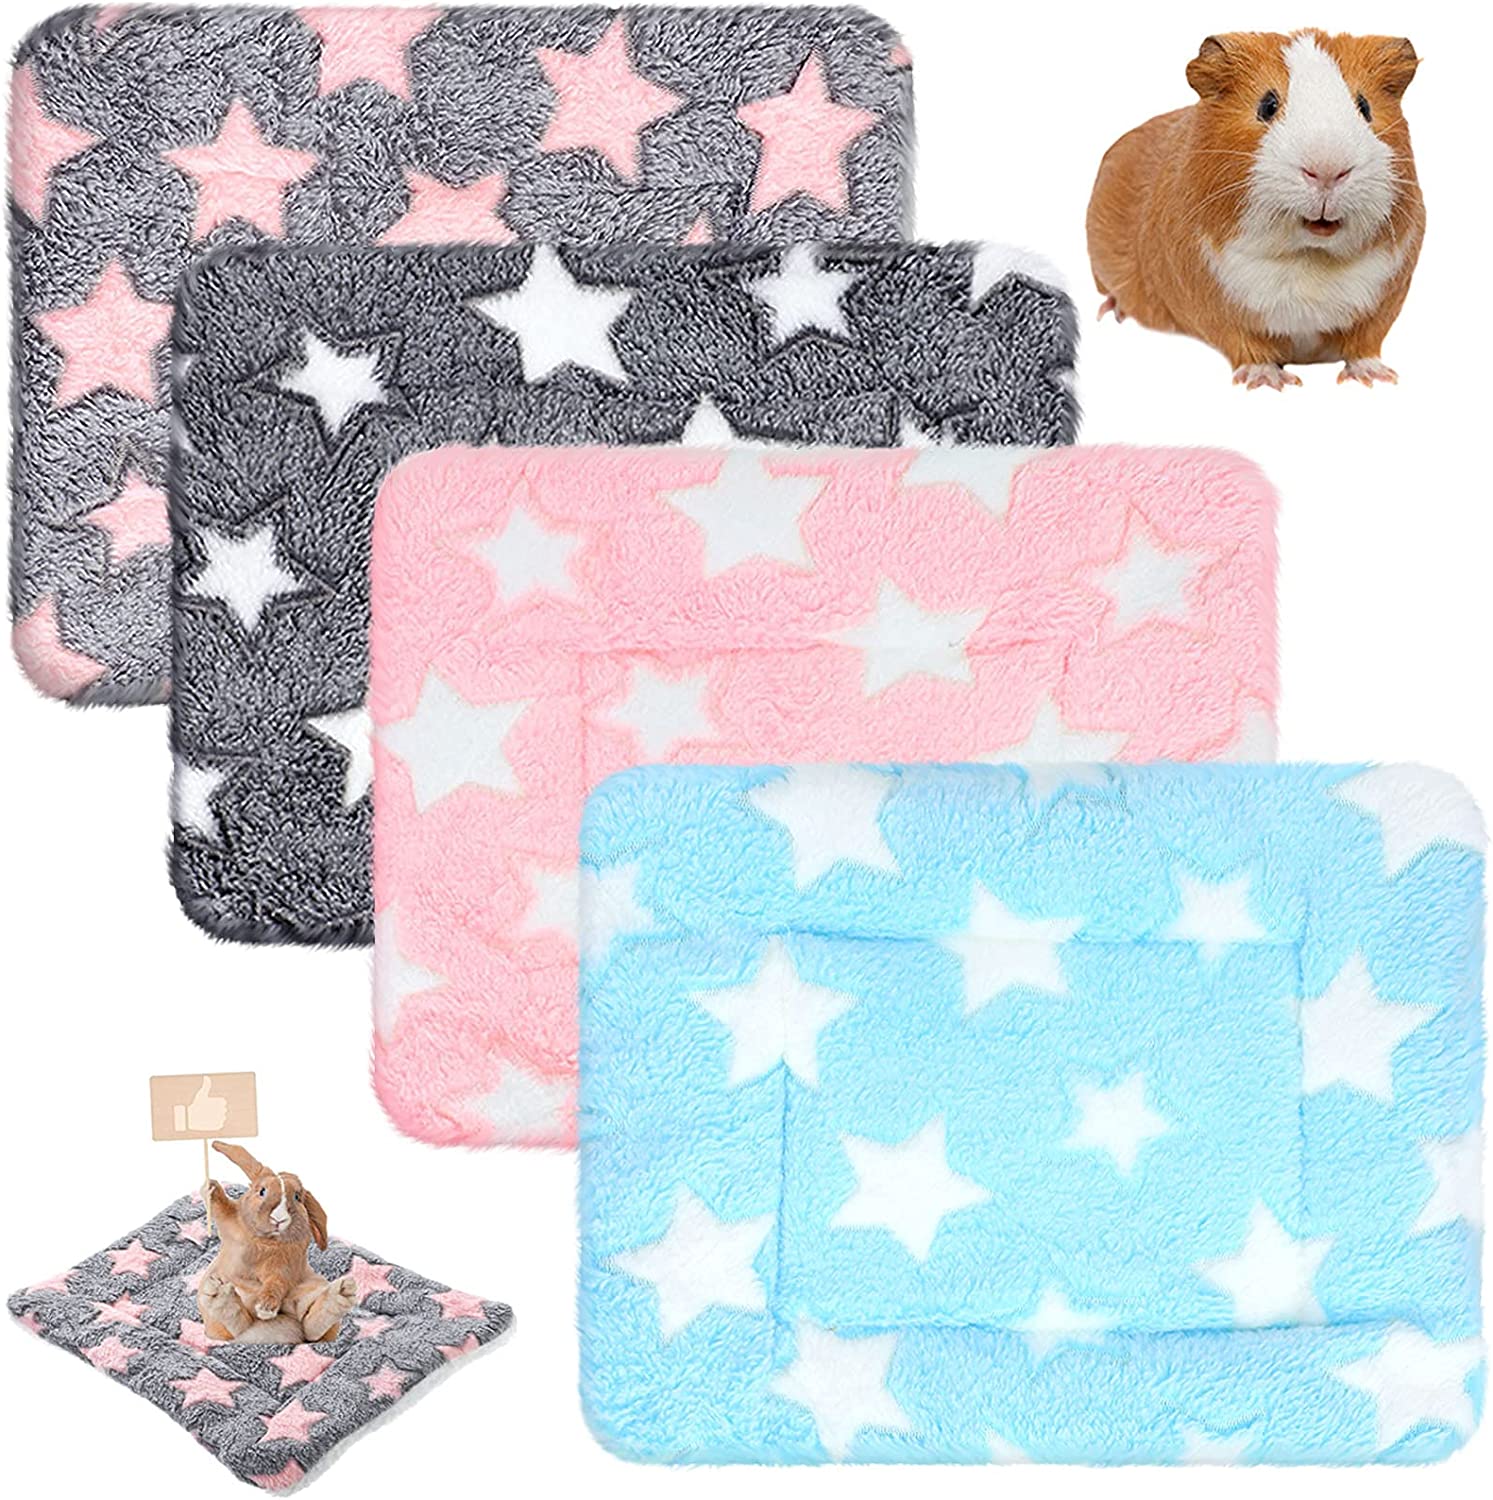 Jetec 4 Pieces Rabbit Guinea Pig Bed Mats Soft Plush Bunny Pad Mats Small Animal Winter Sleep Bedding Mat for Bunny Hamster Guinea Pig Squirrel Rabbit (Big Twinkle, 10 x 11 Inch)